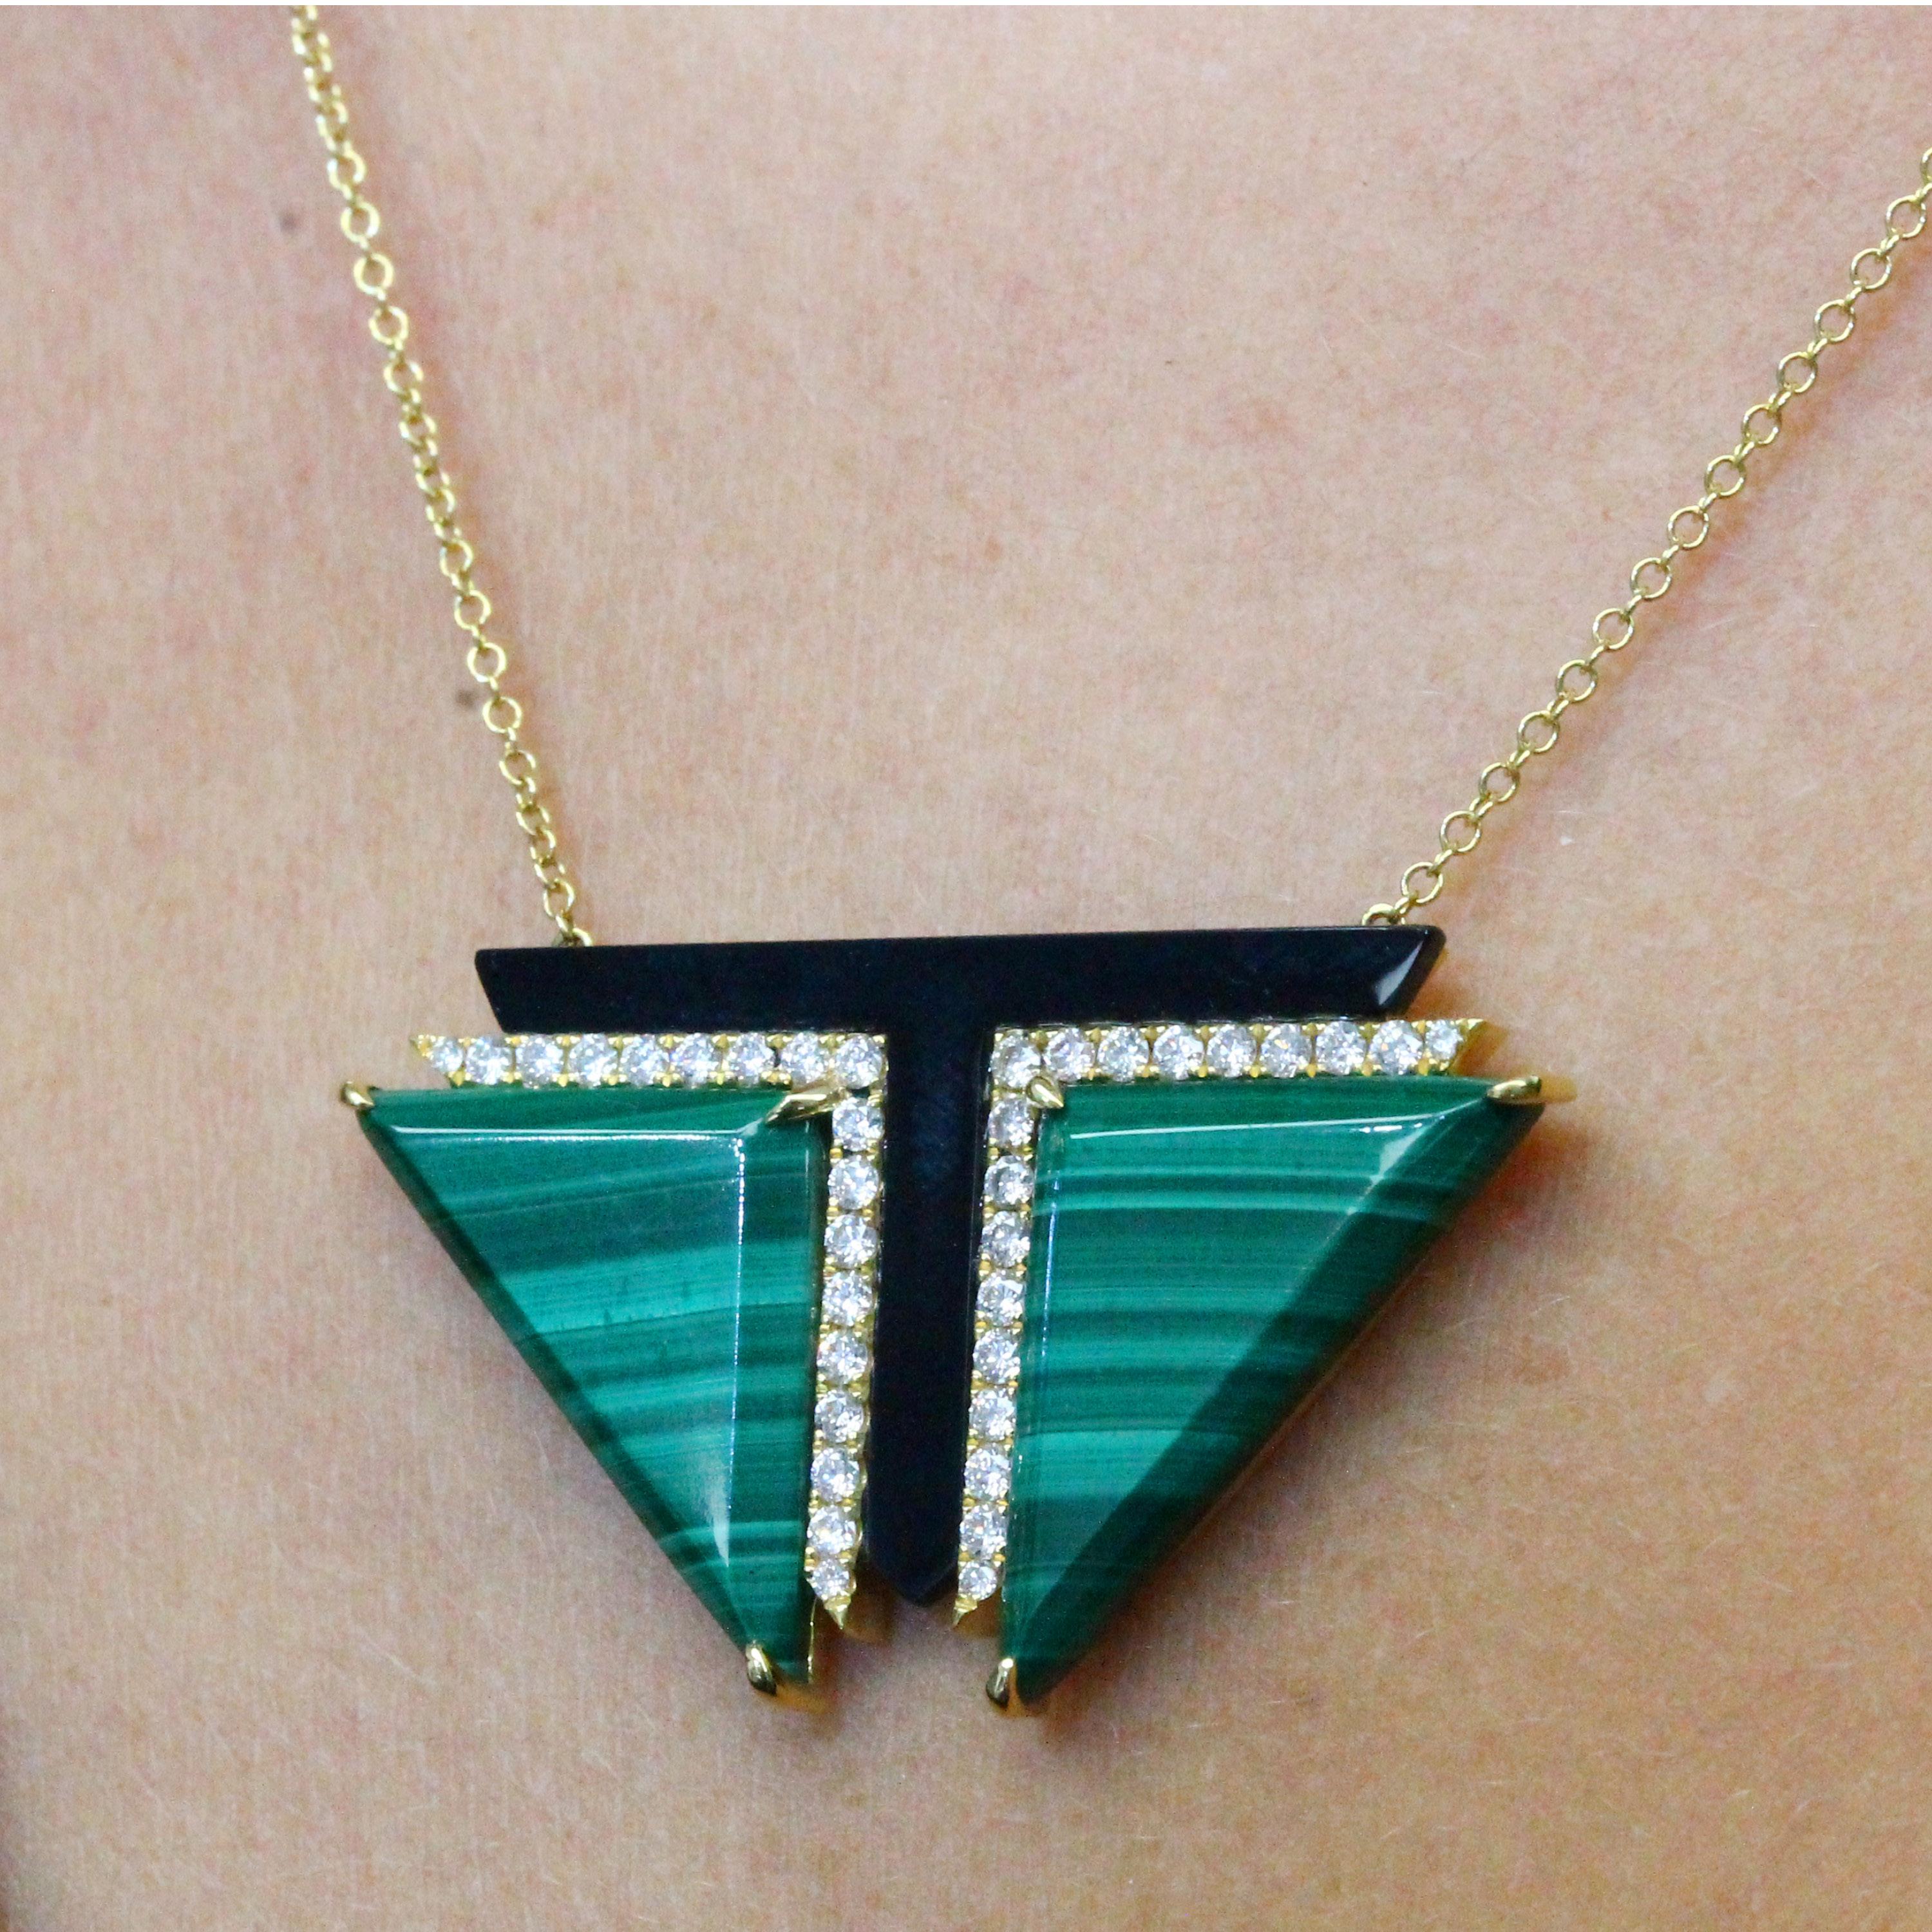 18K Yellow Gold Art Deco Style Necklace w/Malachite, Black Onyx & Diamonds In New Condition For Sale In Great Neck, NY